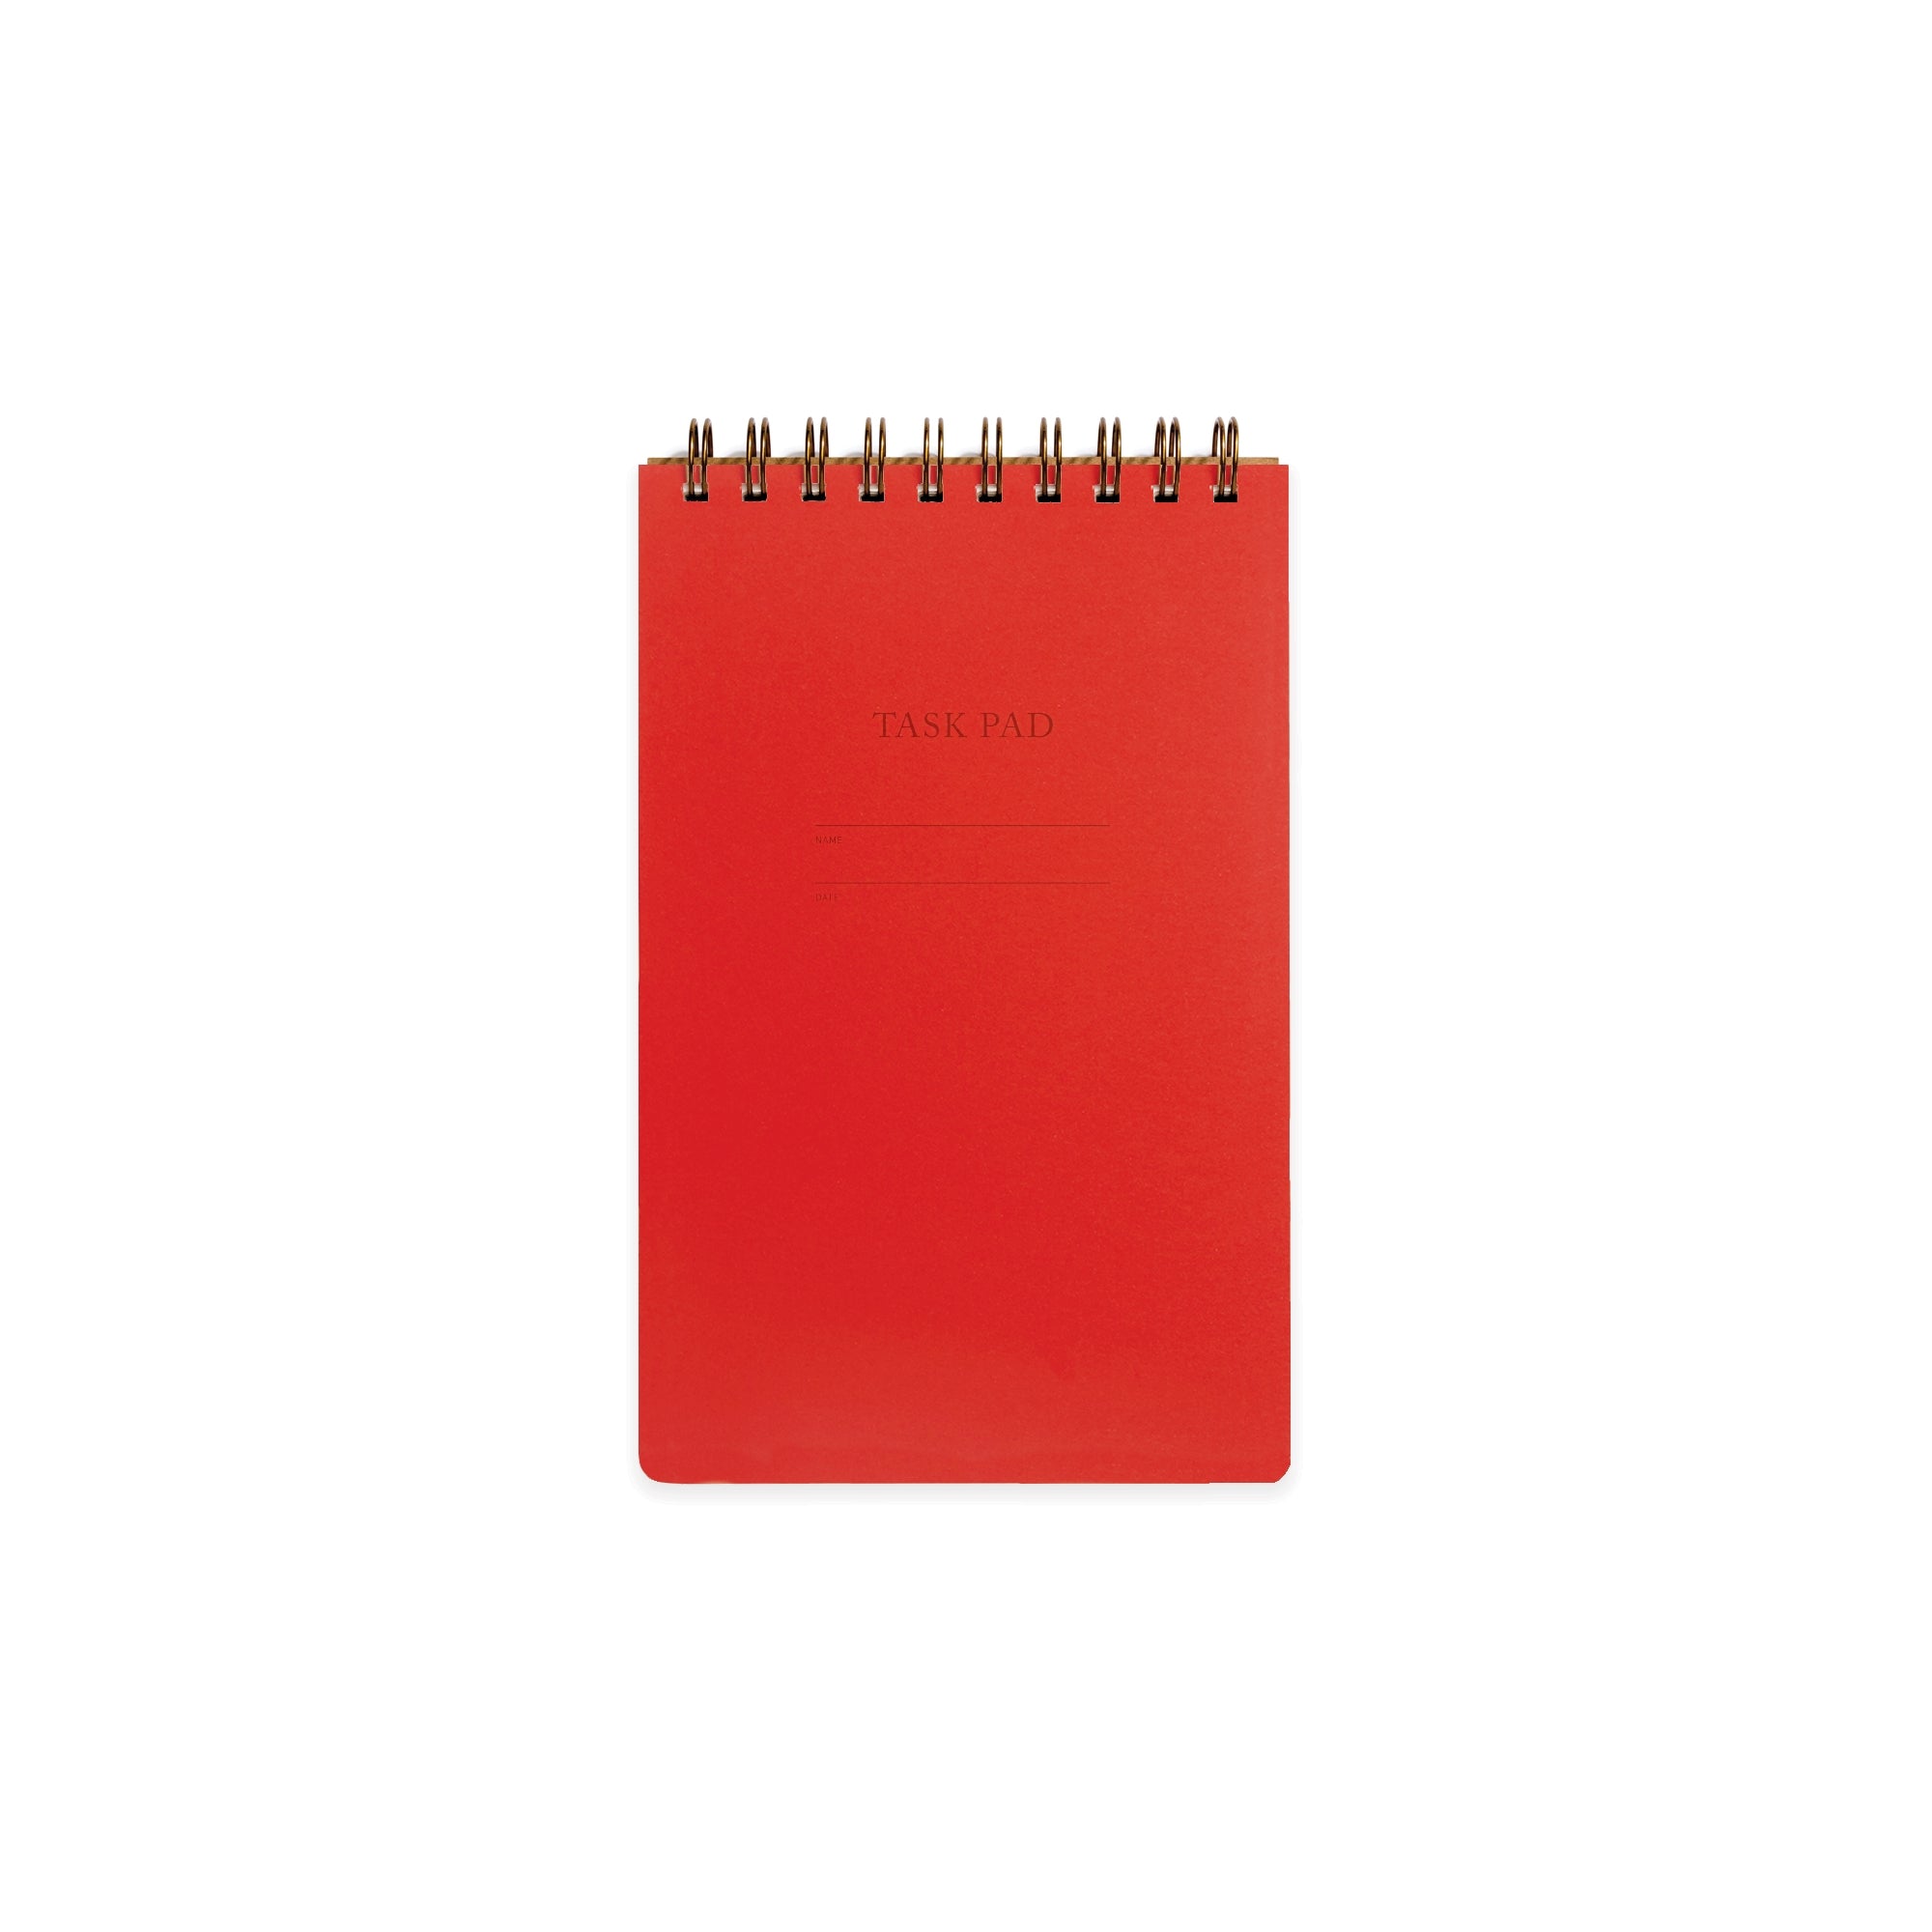 Image red with letter pressed text says, “Task pad”. “Name” and “Date” with lines for writing. Coiled binding on top.